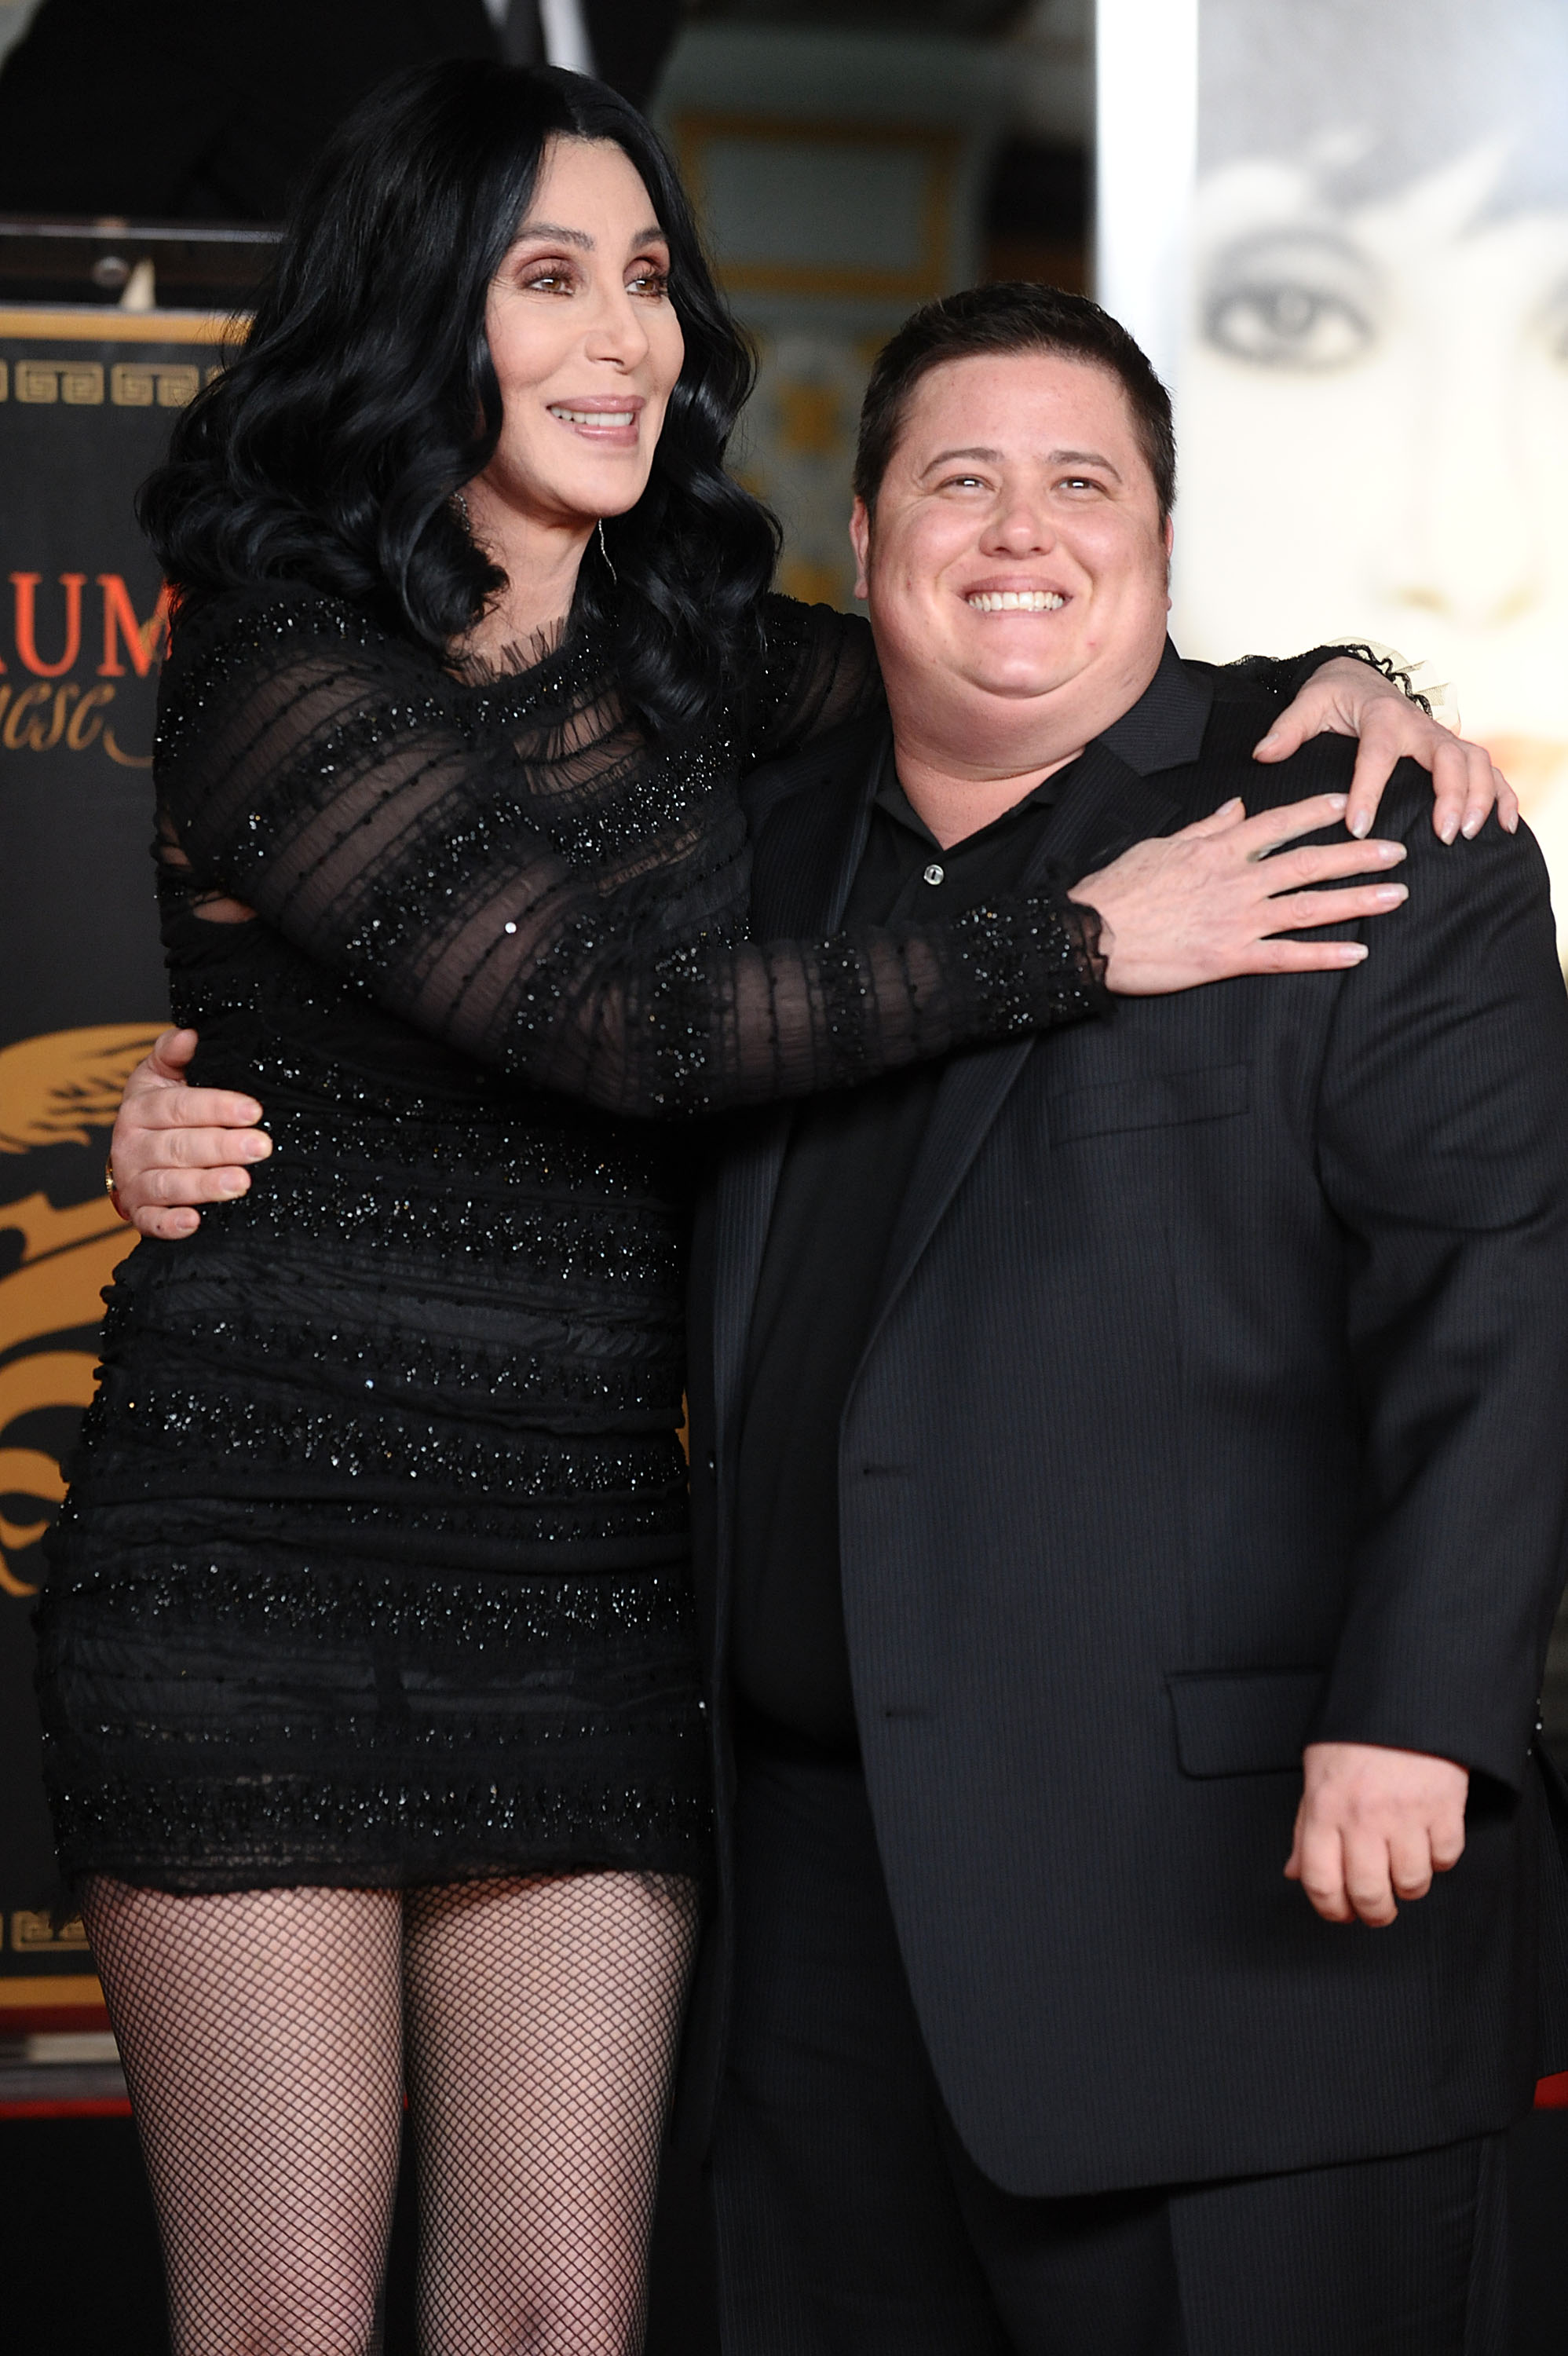 Cher and Chaz Bono attend Cher's hand and footprint ceremony at Grauman's Chinese Theatre in Hollywood, California, on November 18, 2010. | Source: Getty Images